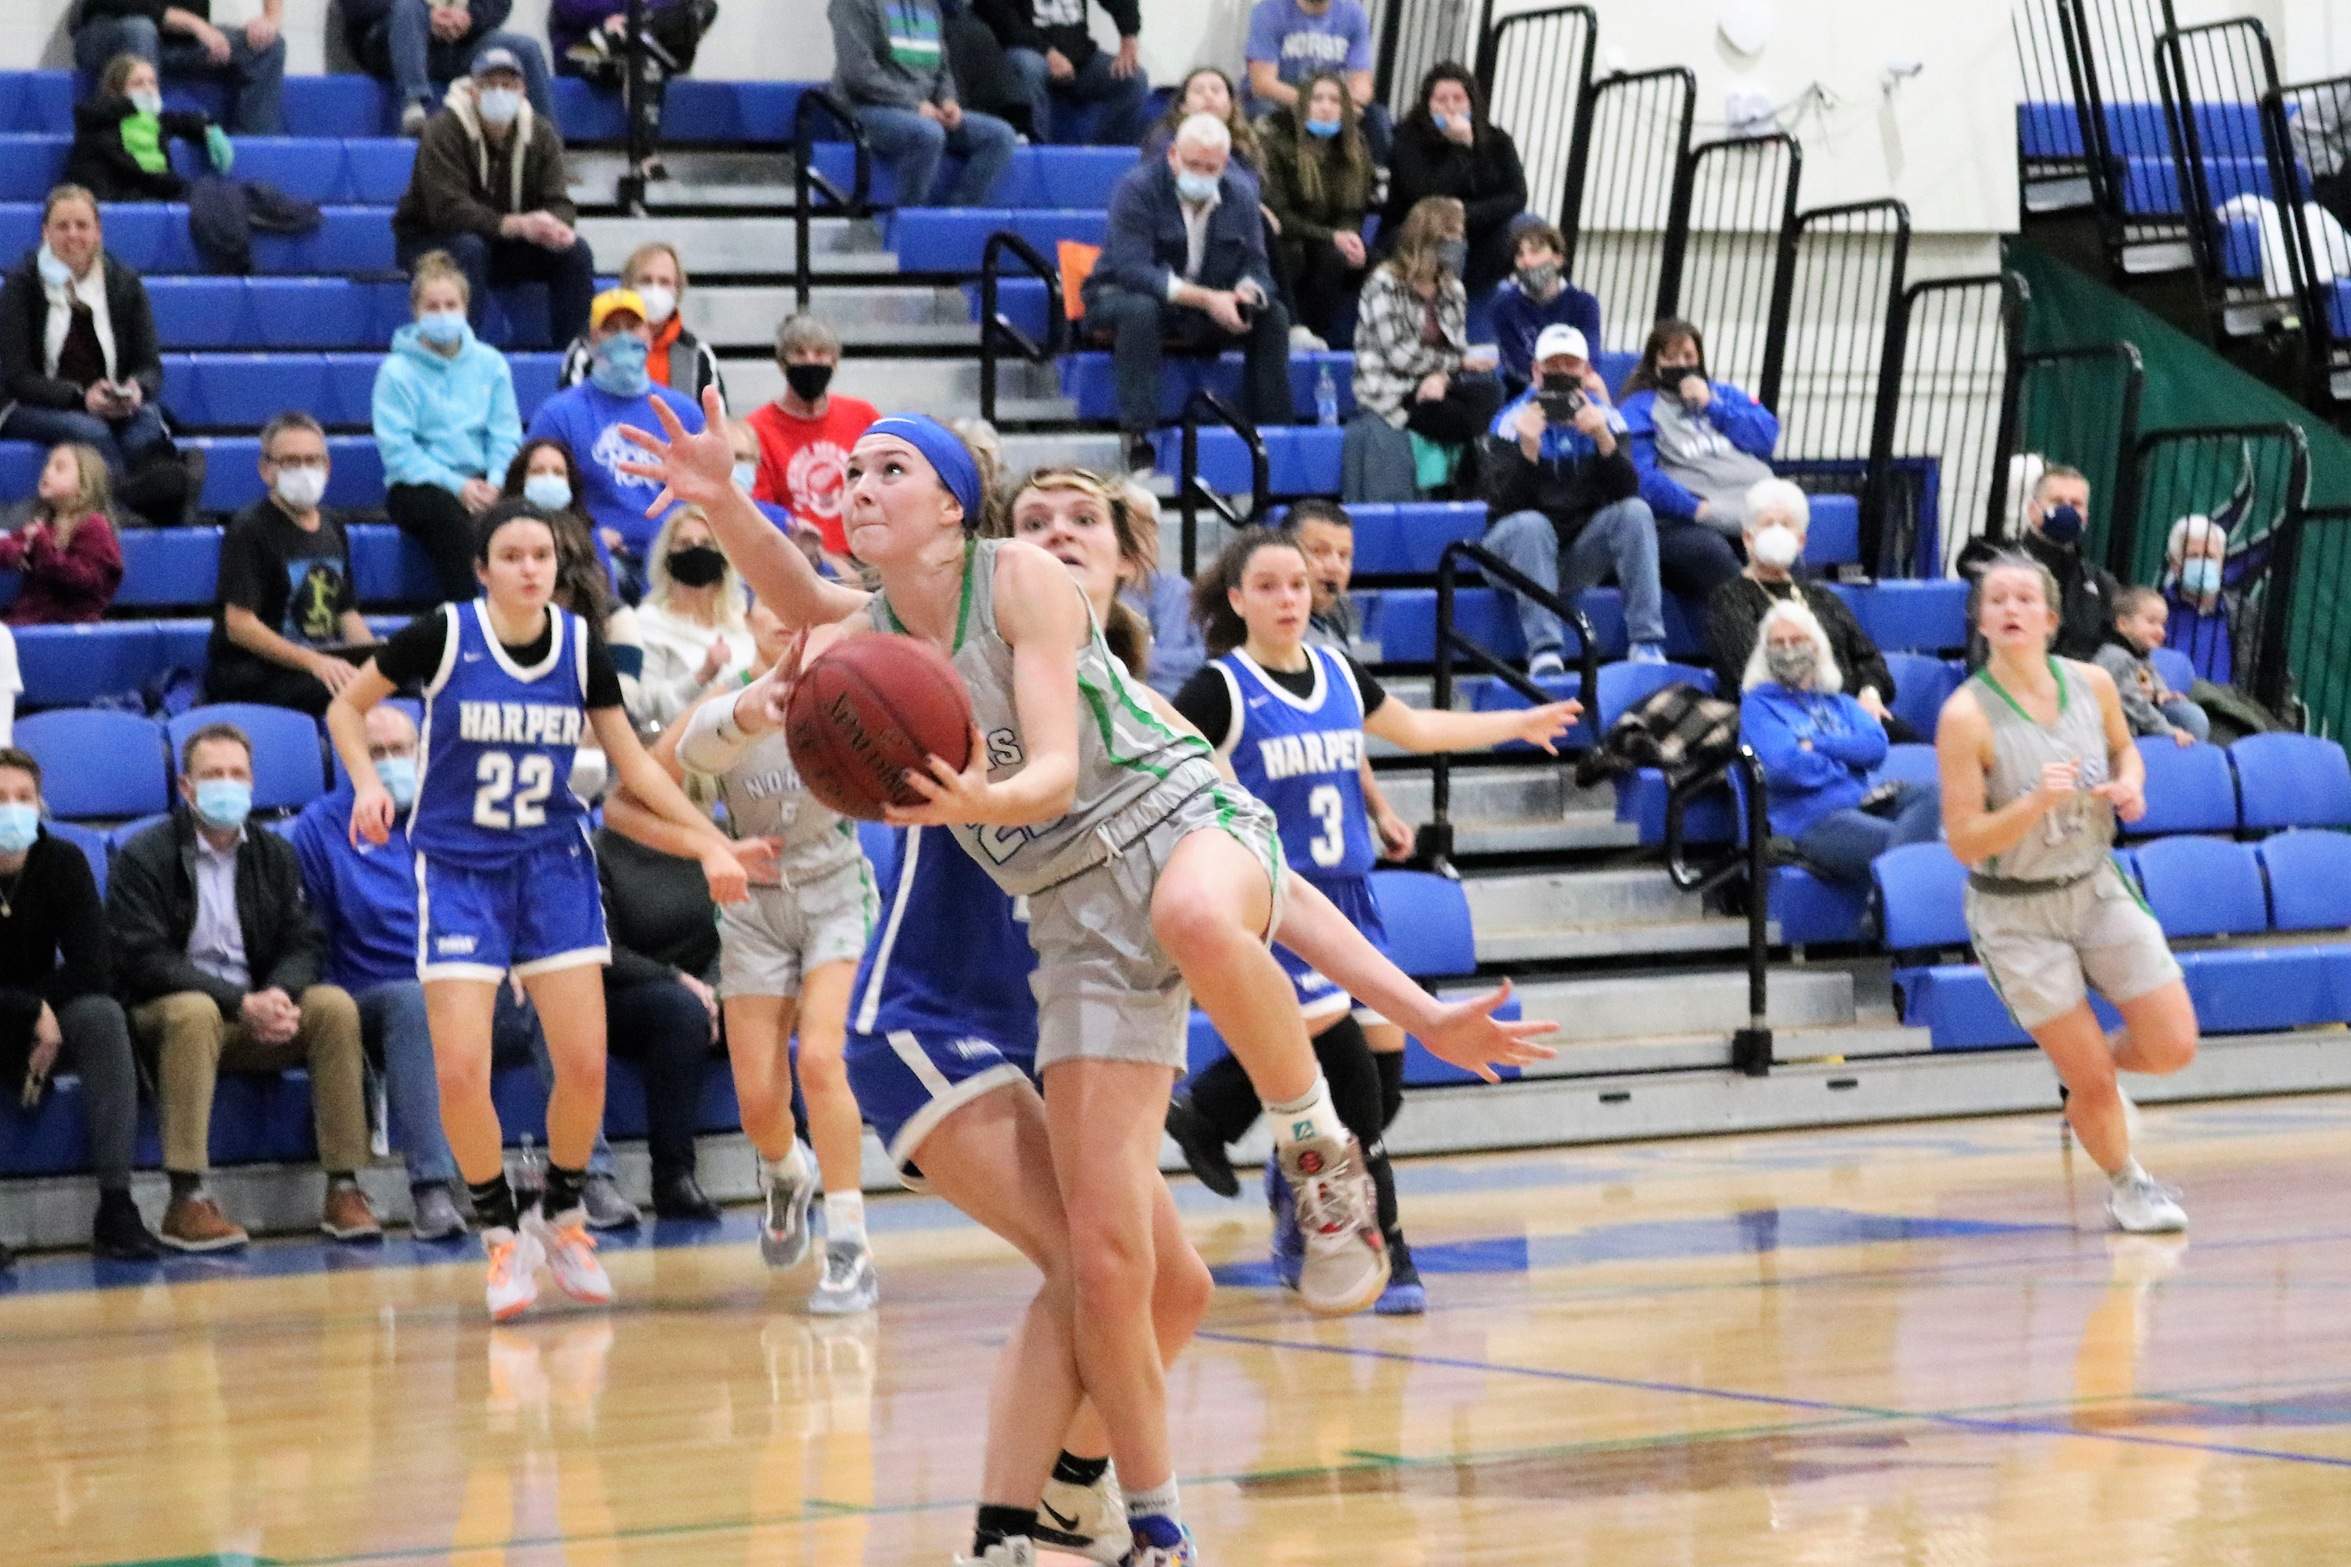 Cheveney Koski fights through contact in the lane as she turns to shoot the ball